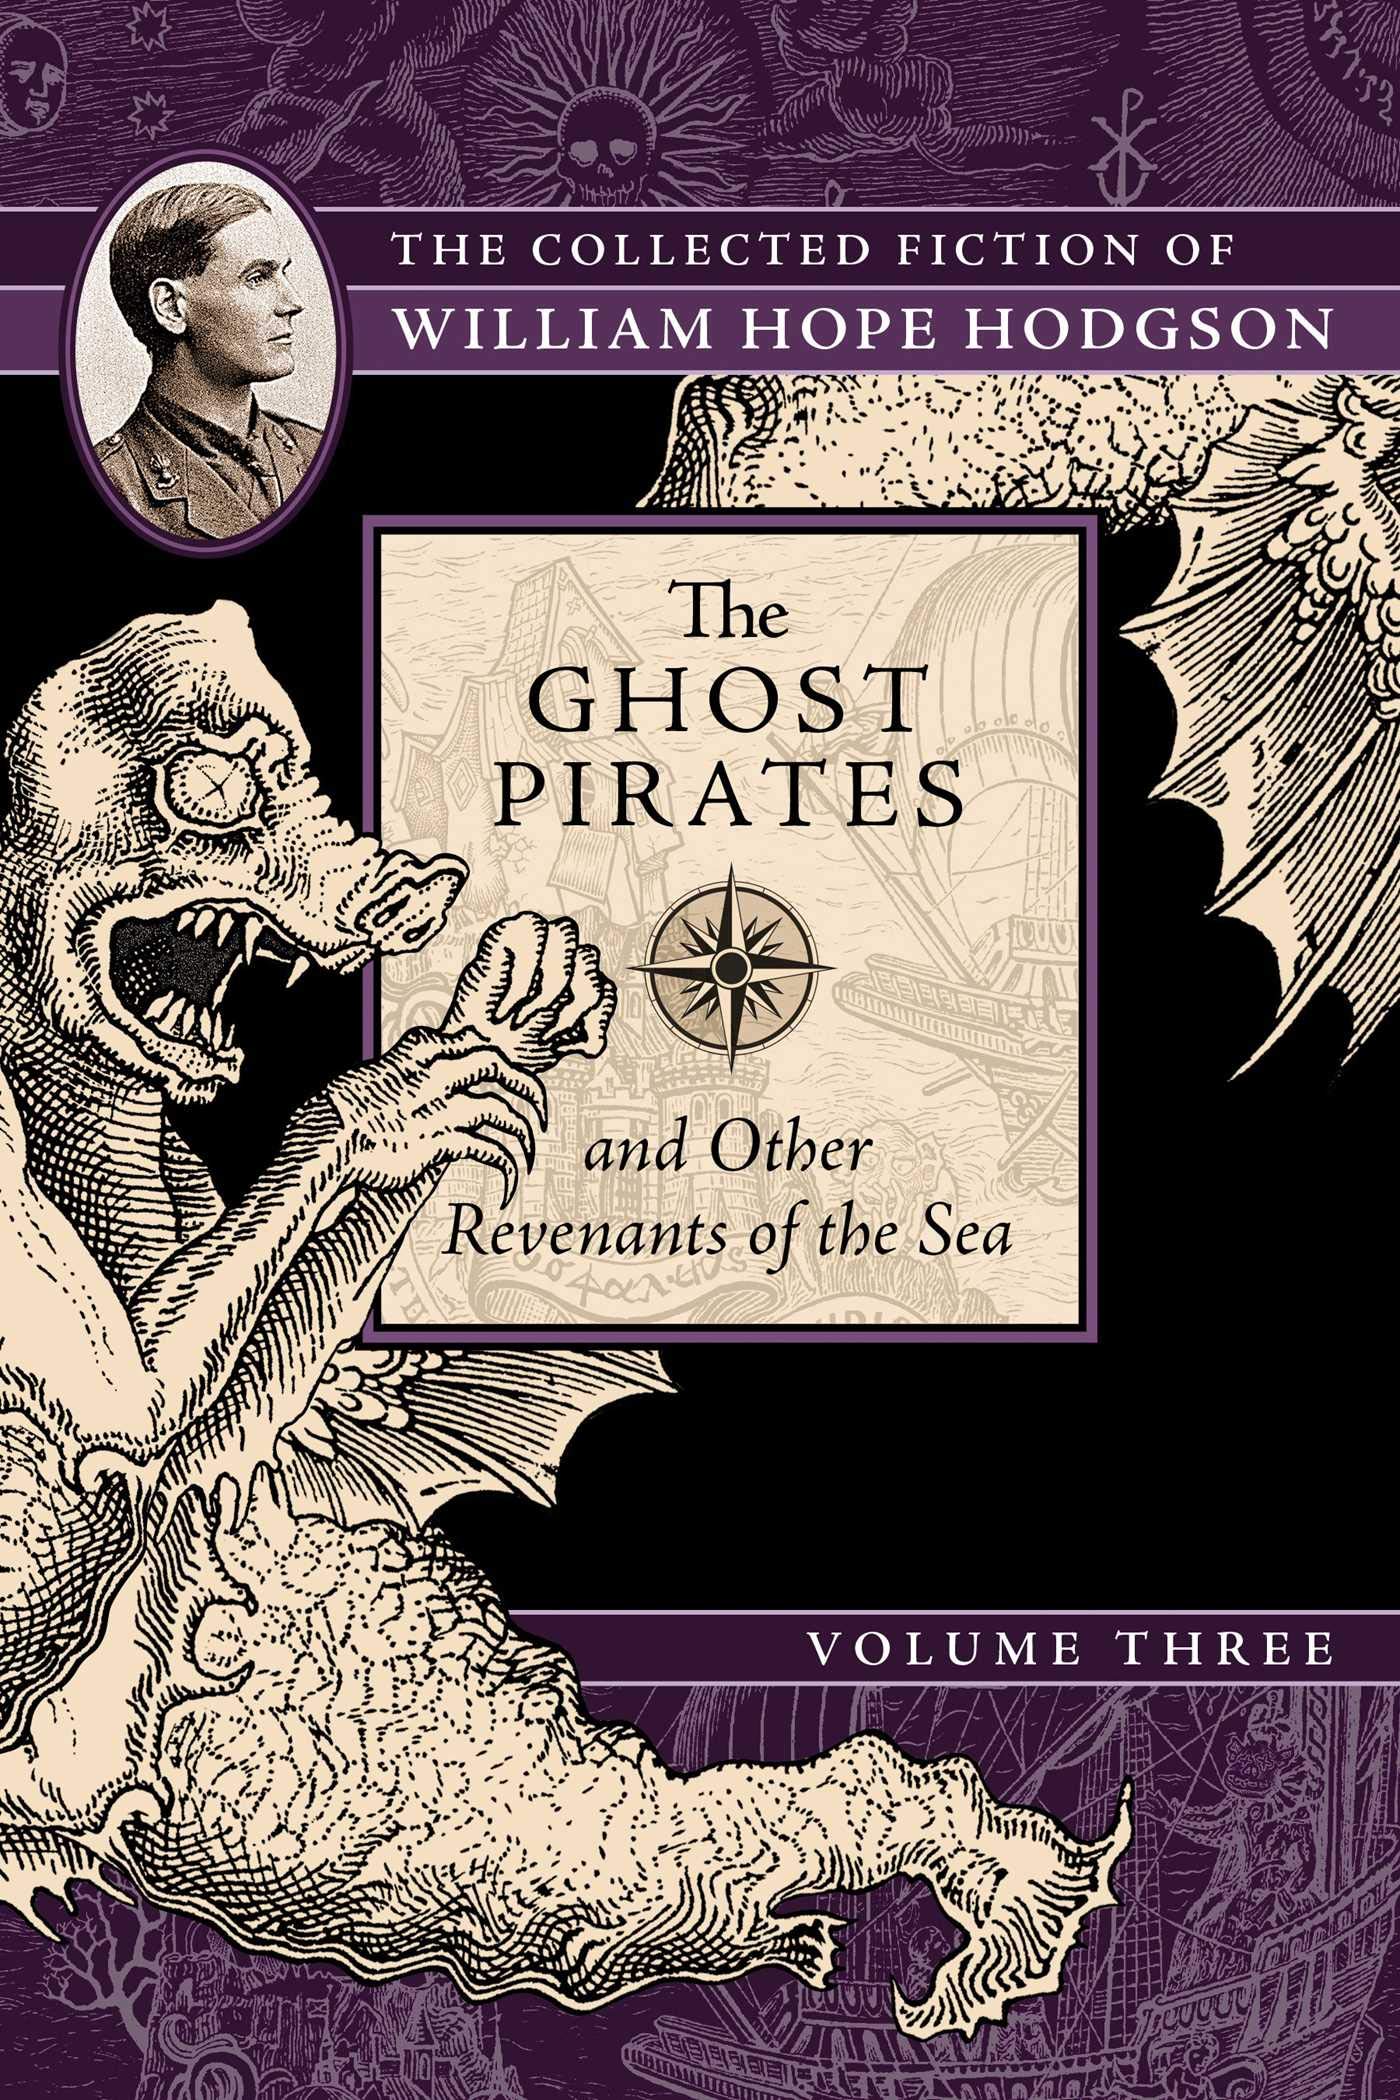 The Ghost Pirates and Other Revenants of the Sea